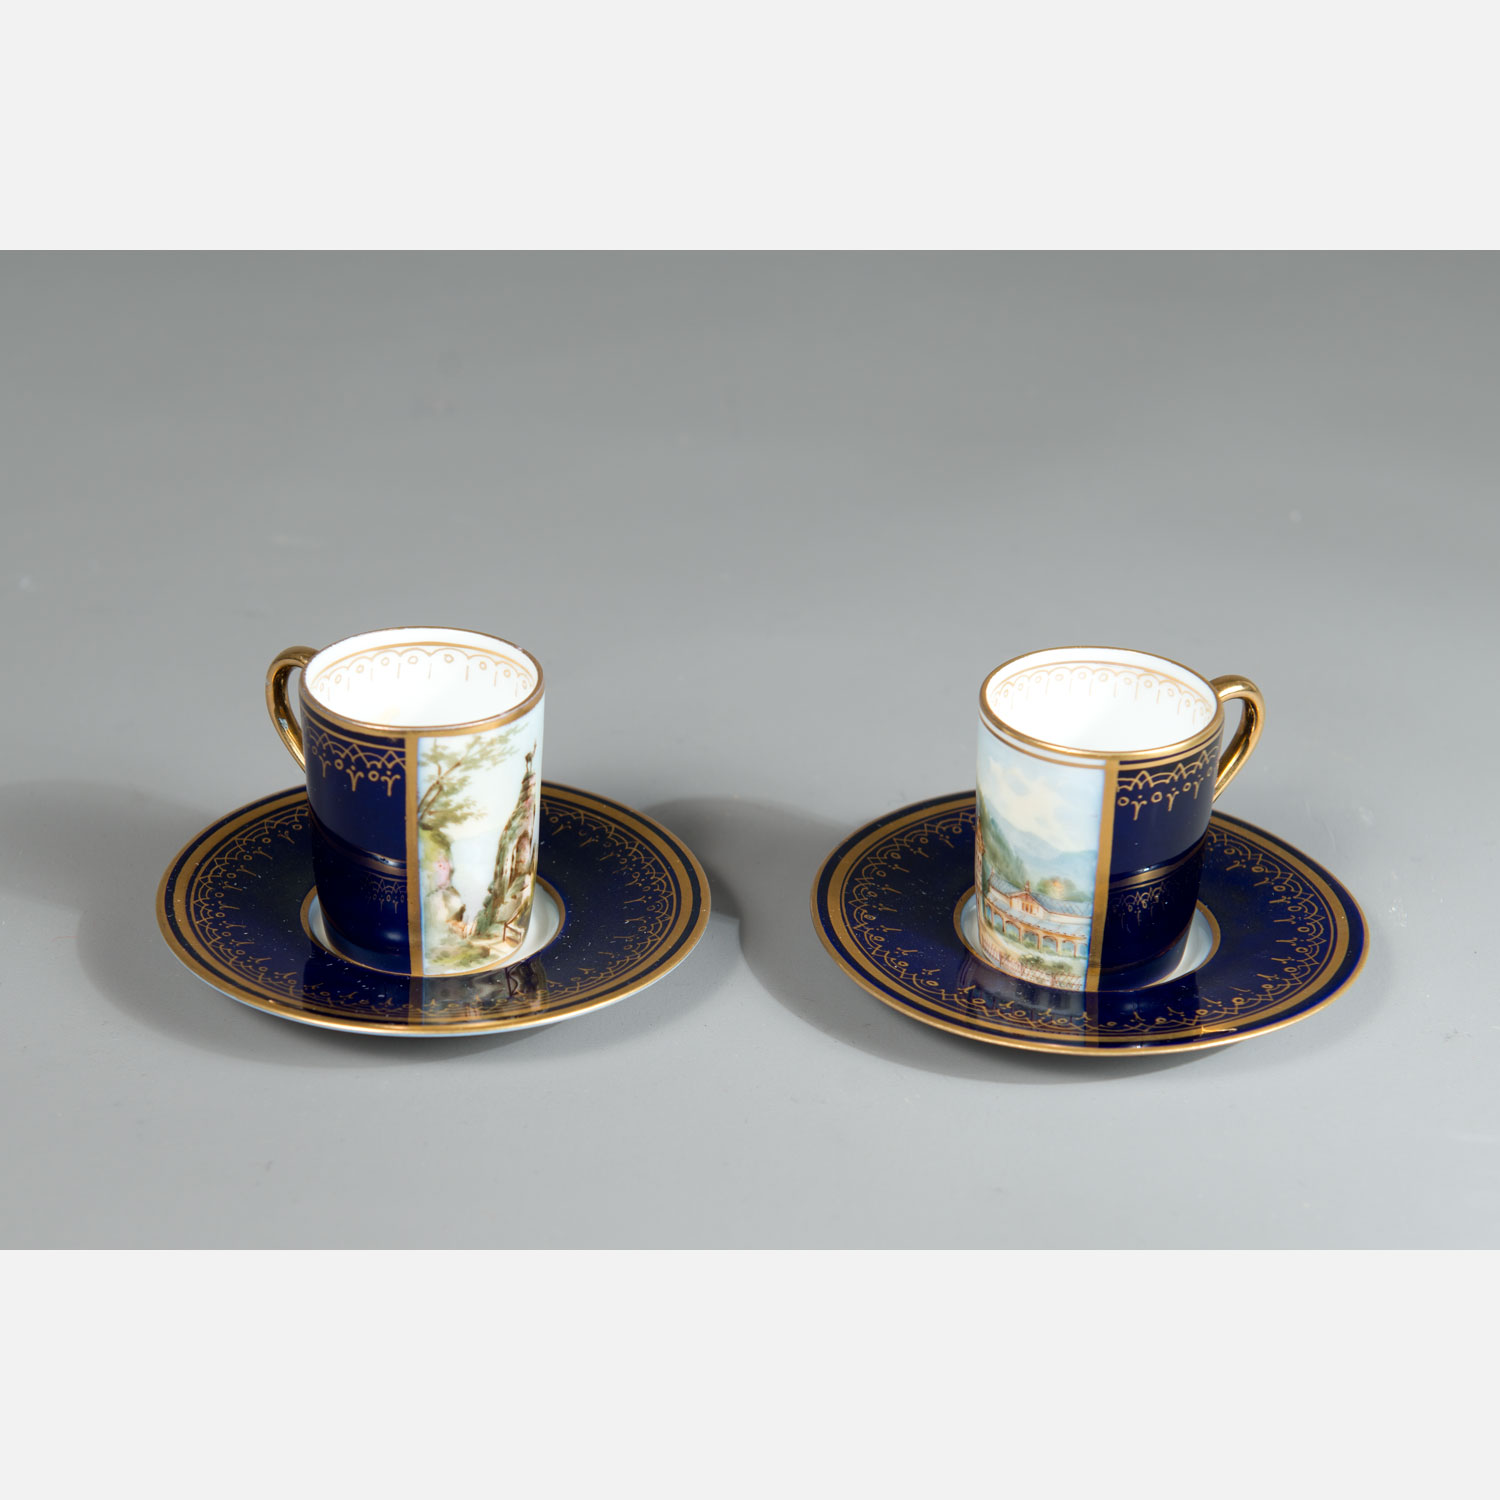 Two Vienna porcelain cups